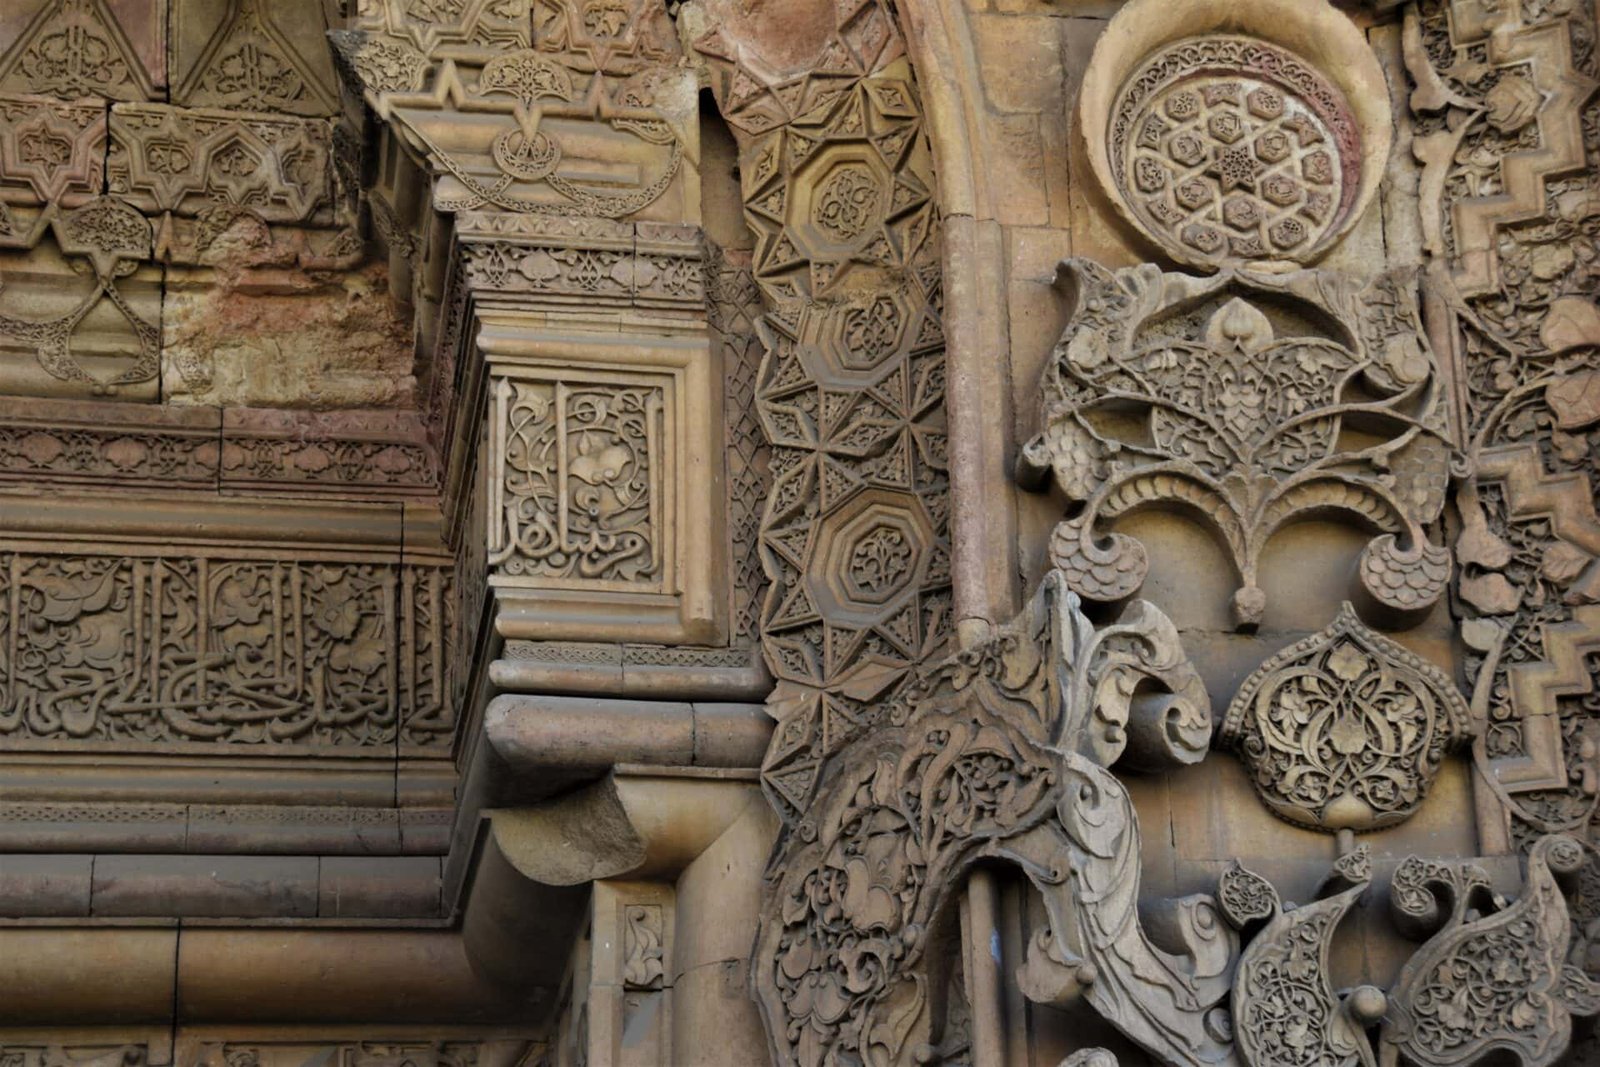 incredible floral stone ornaments adorning the main gate of the Great Mosque of marvellous stone ornaments above a side entrance to the Great Mosque of Divriği